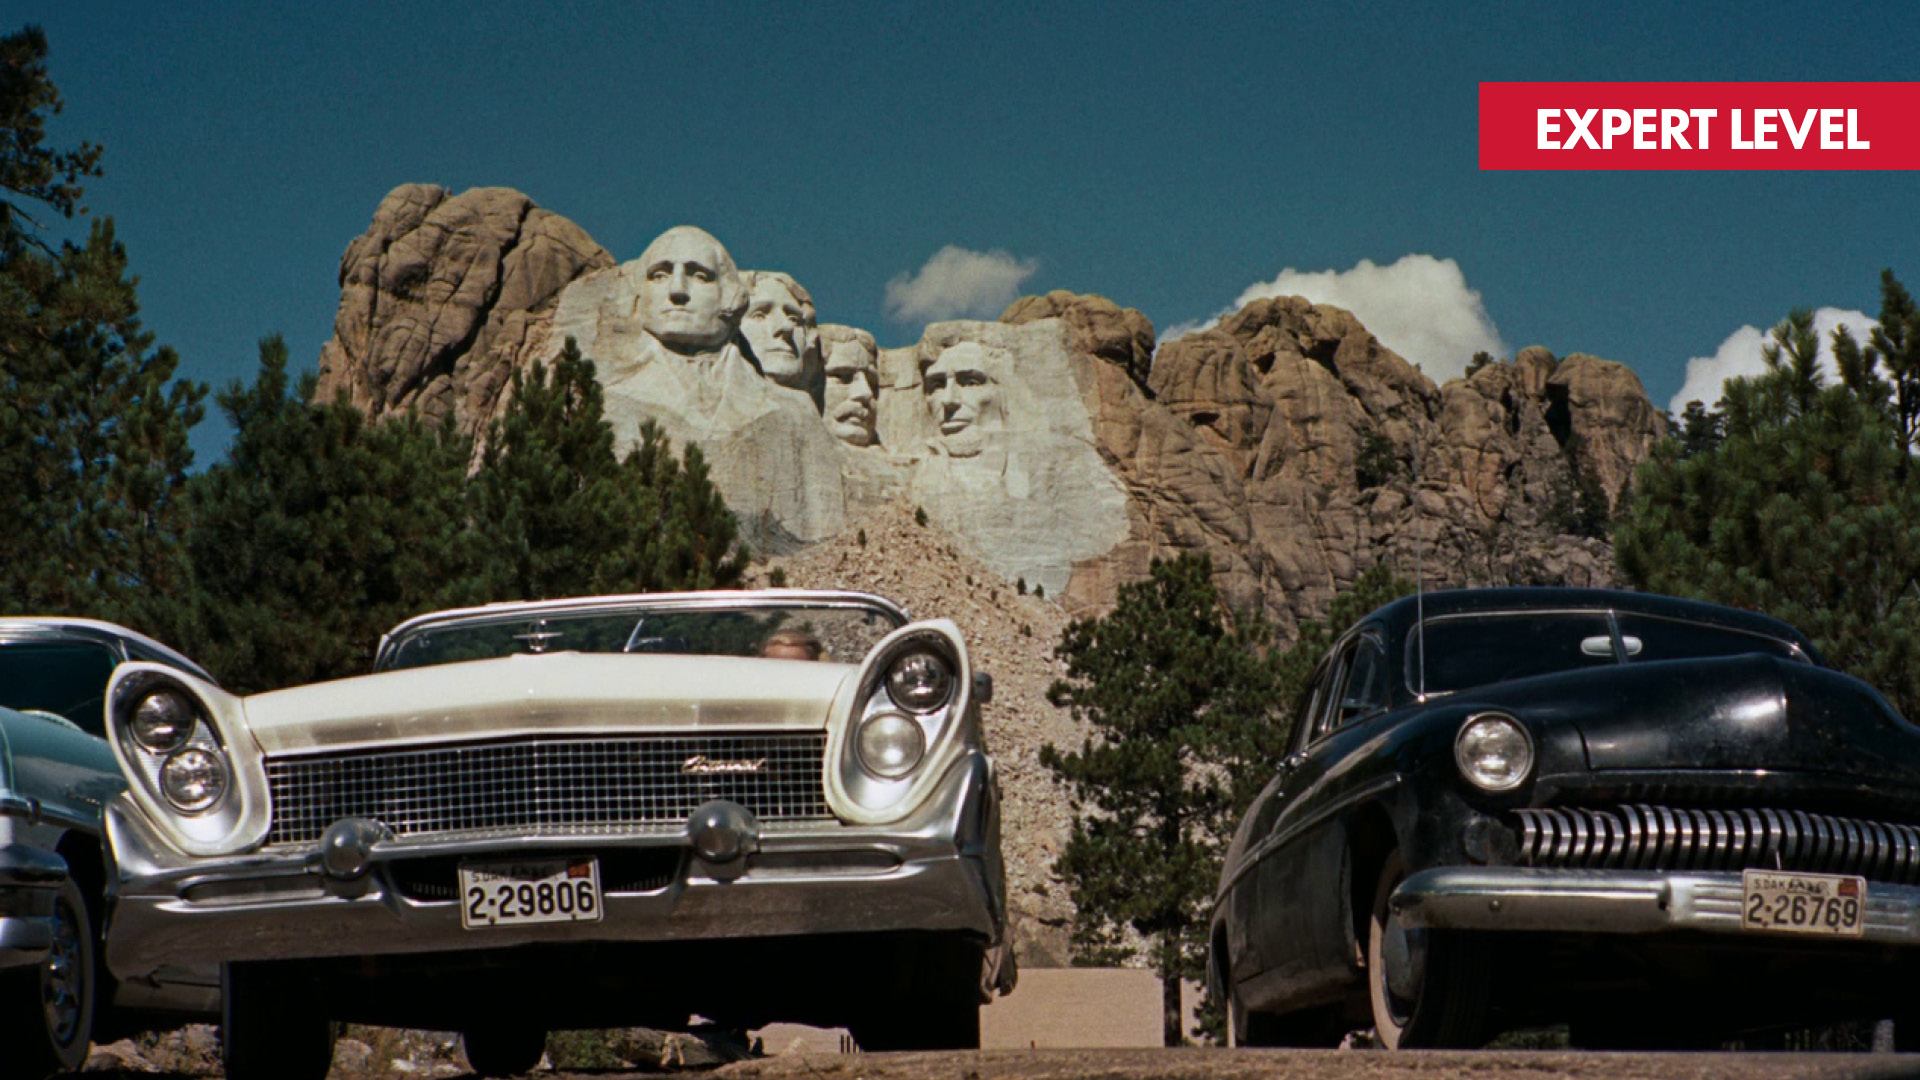 NORTH BY NORTHWEST film of the Mount Rushmore National Memorial